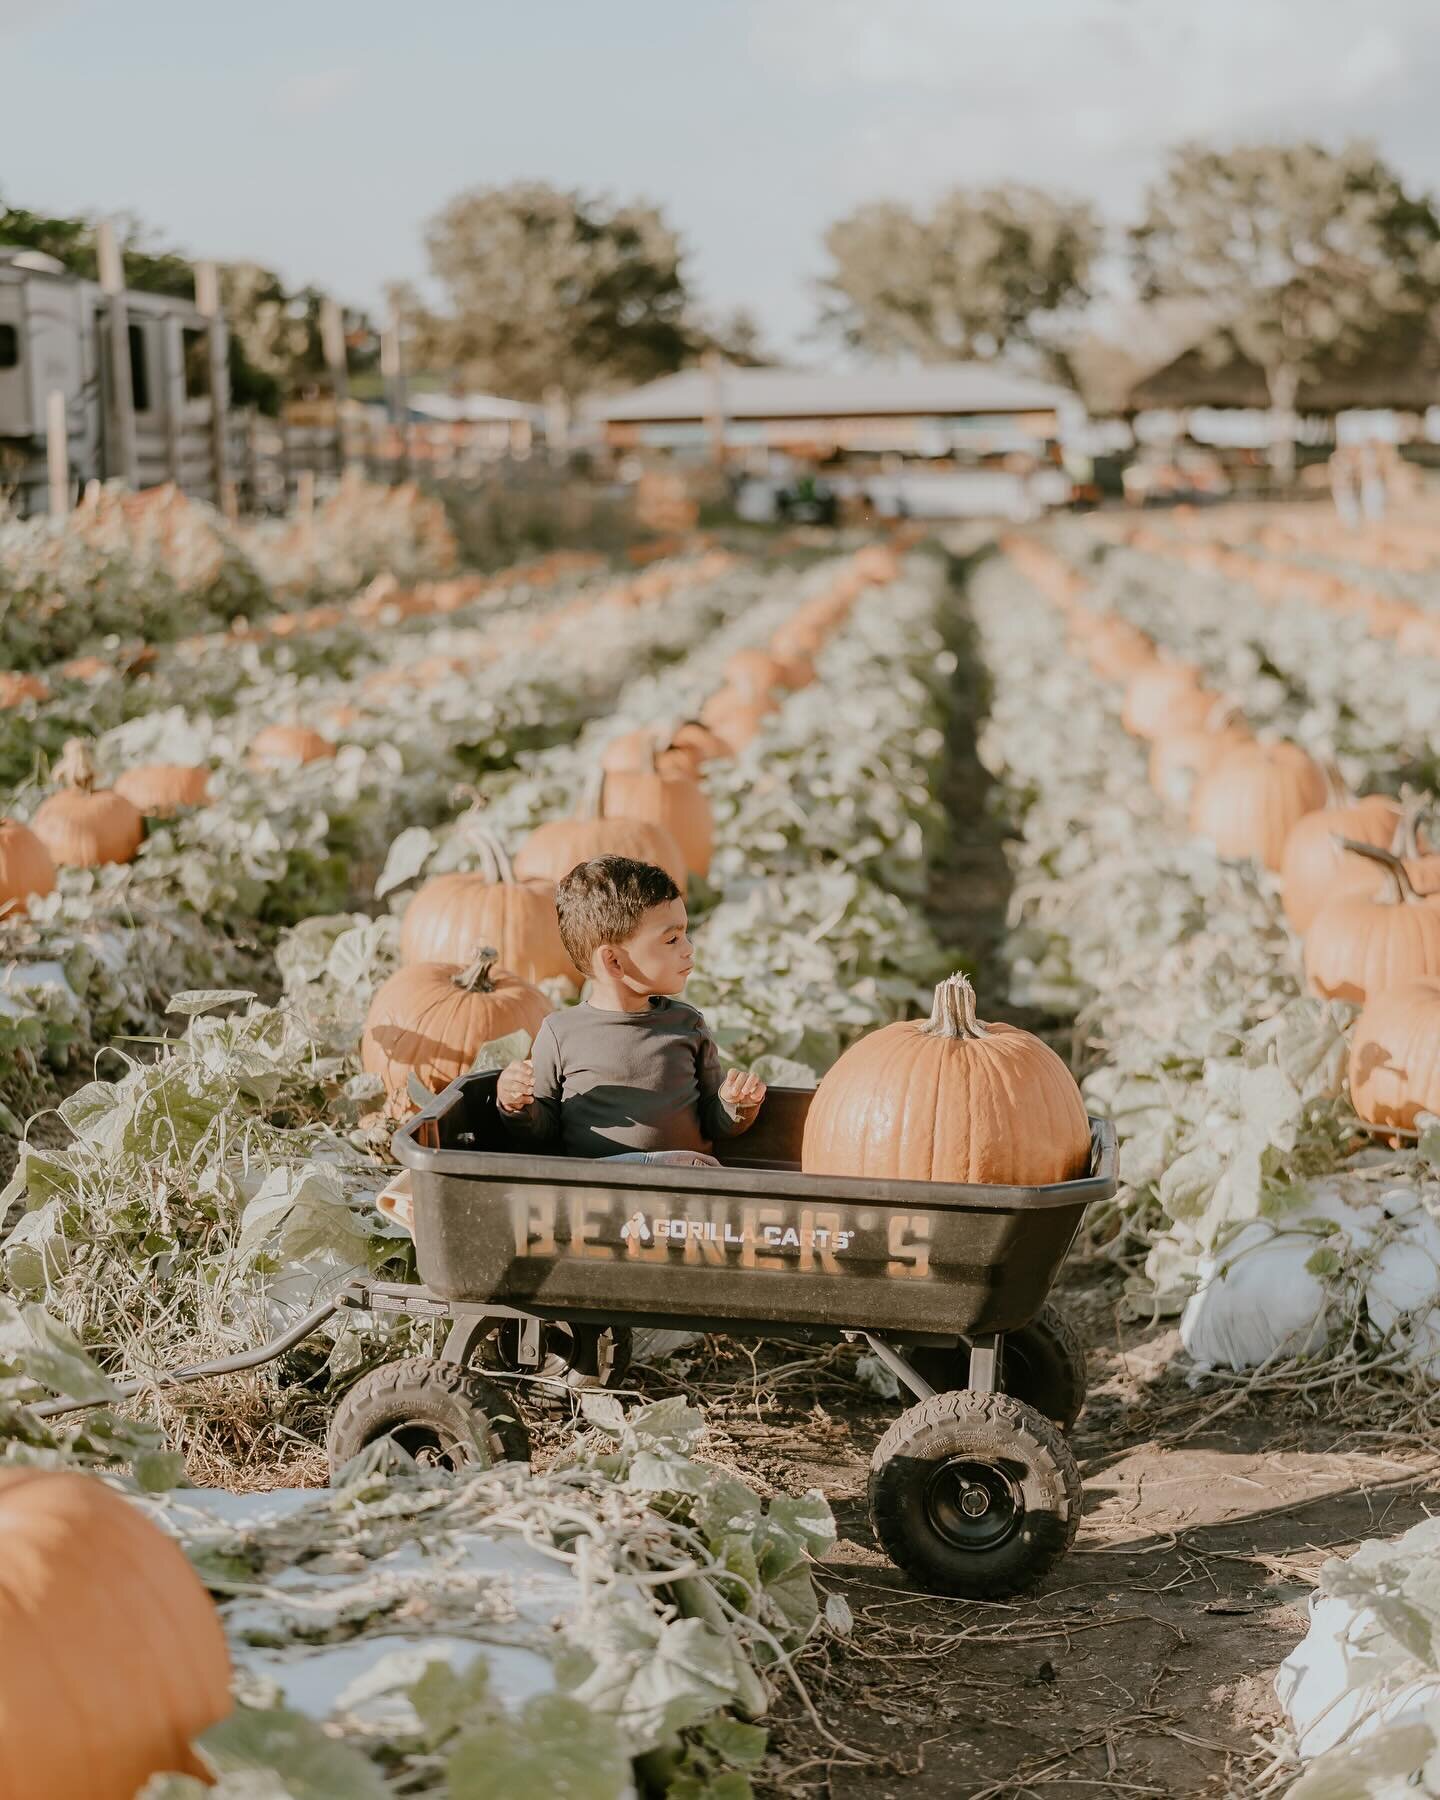 Noah takes on his first pumpkin patch (it did not go well) 🎃🍂
&bull;
&bull;
&bull;
#pumpkinpatch 
#pumpkinpatchphotoshoot 
#pumpkinseason 
#lifestylesession 
#lifestylephotographer 
#toddlerphotography 
#toddlerphotoshoot 
#centralfloridaphotograph